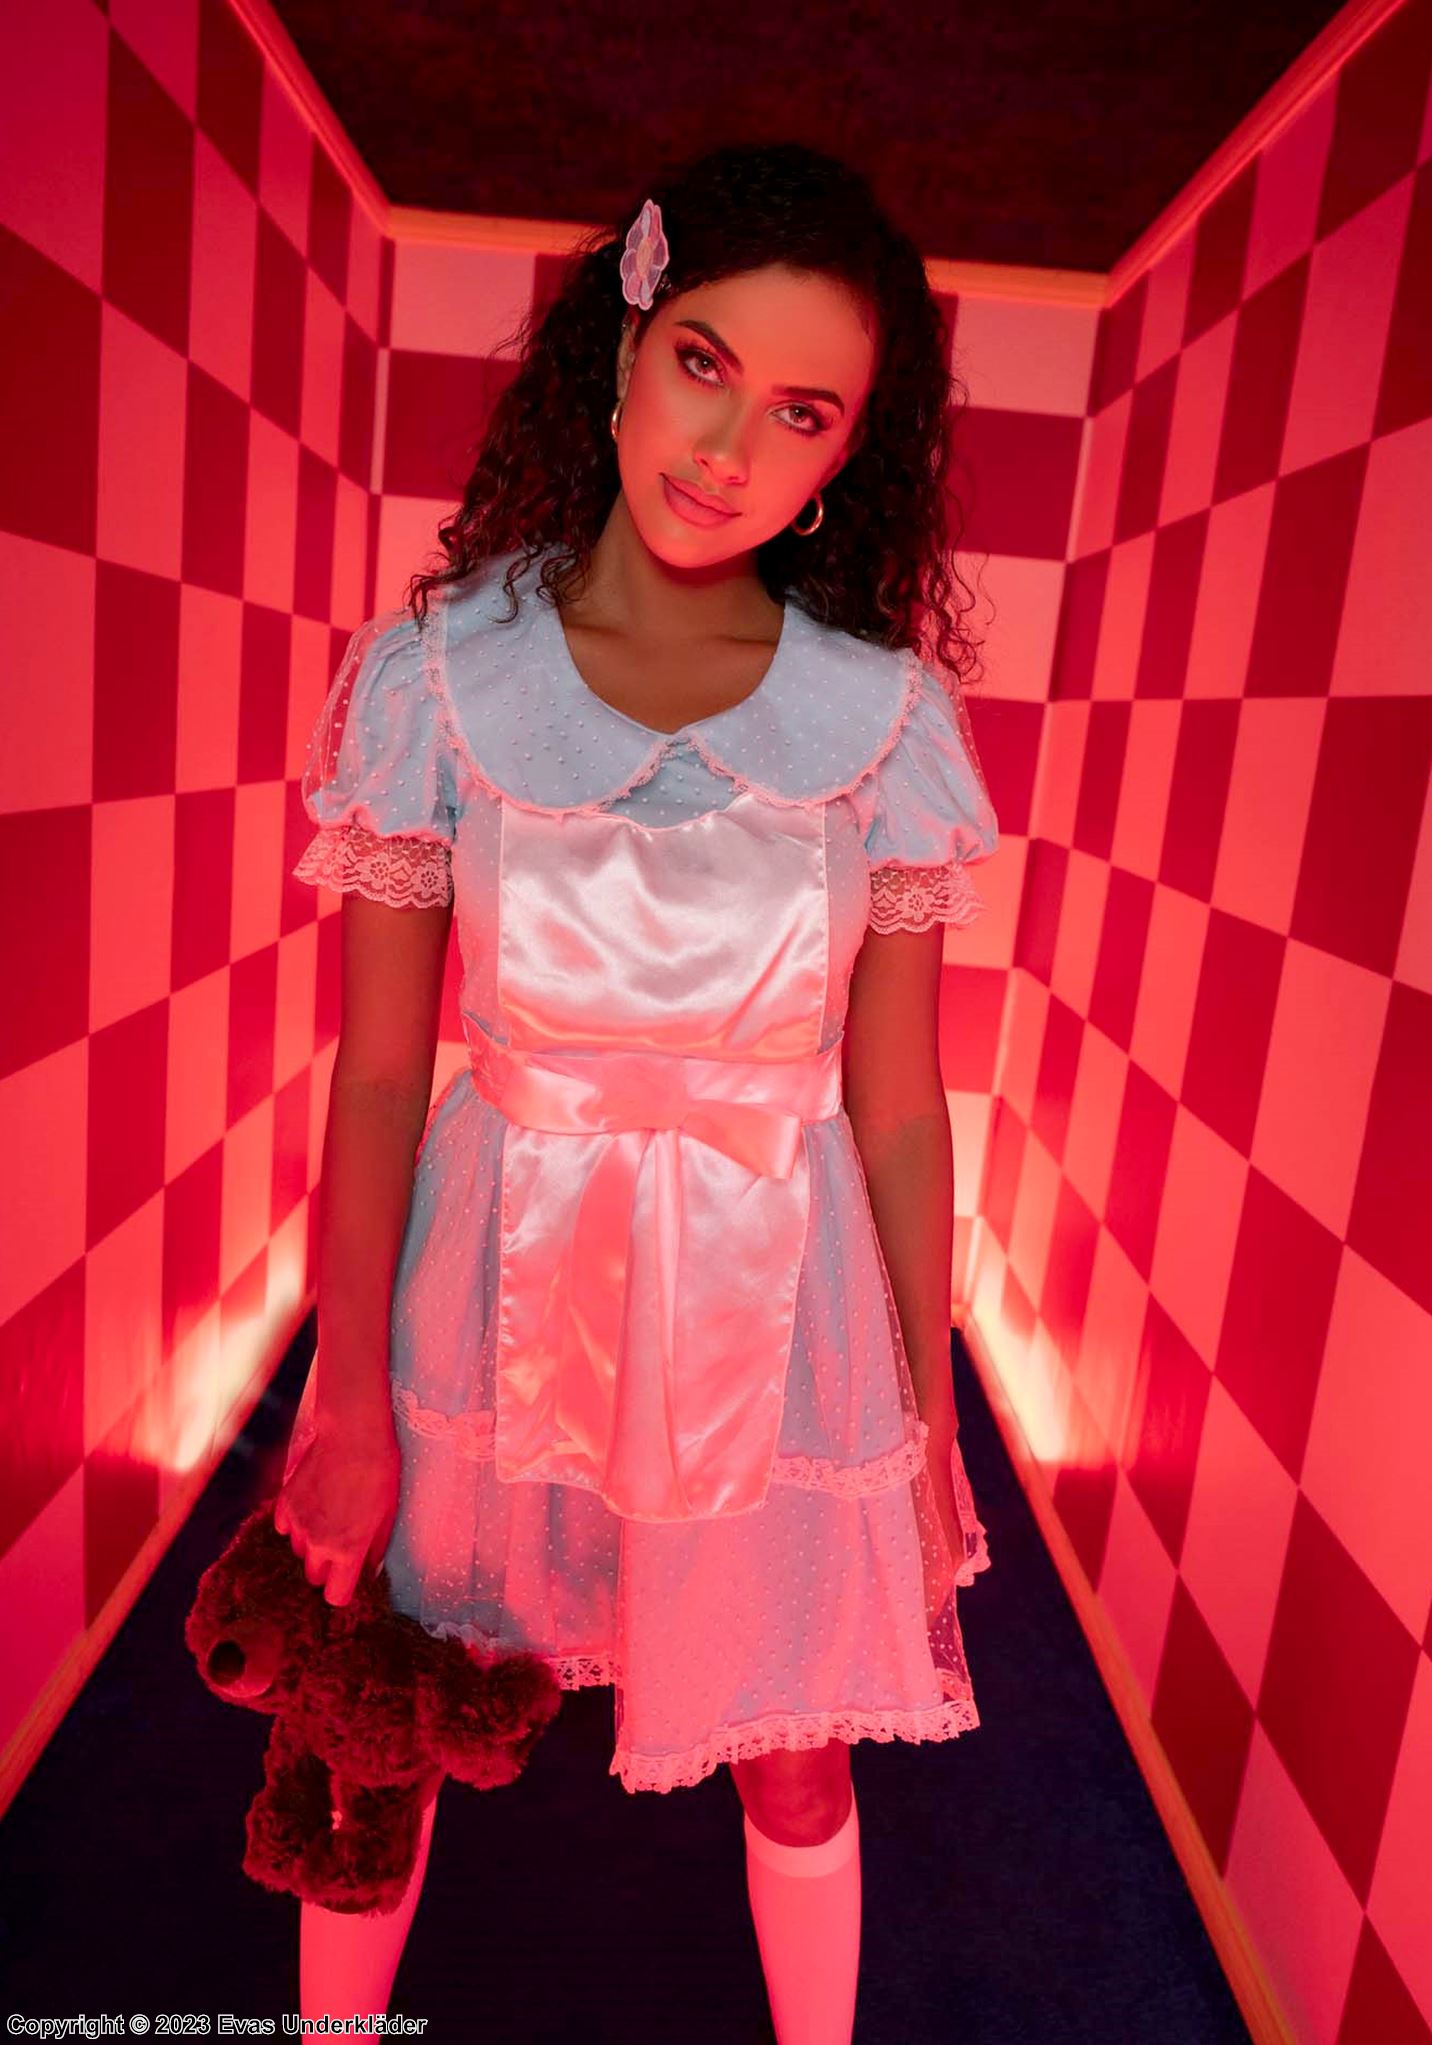 Grady twin from The Shining, costume dress, lace trim, big bow, puff sleeves, small dots